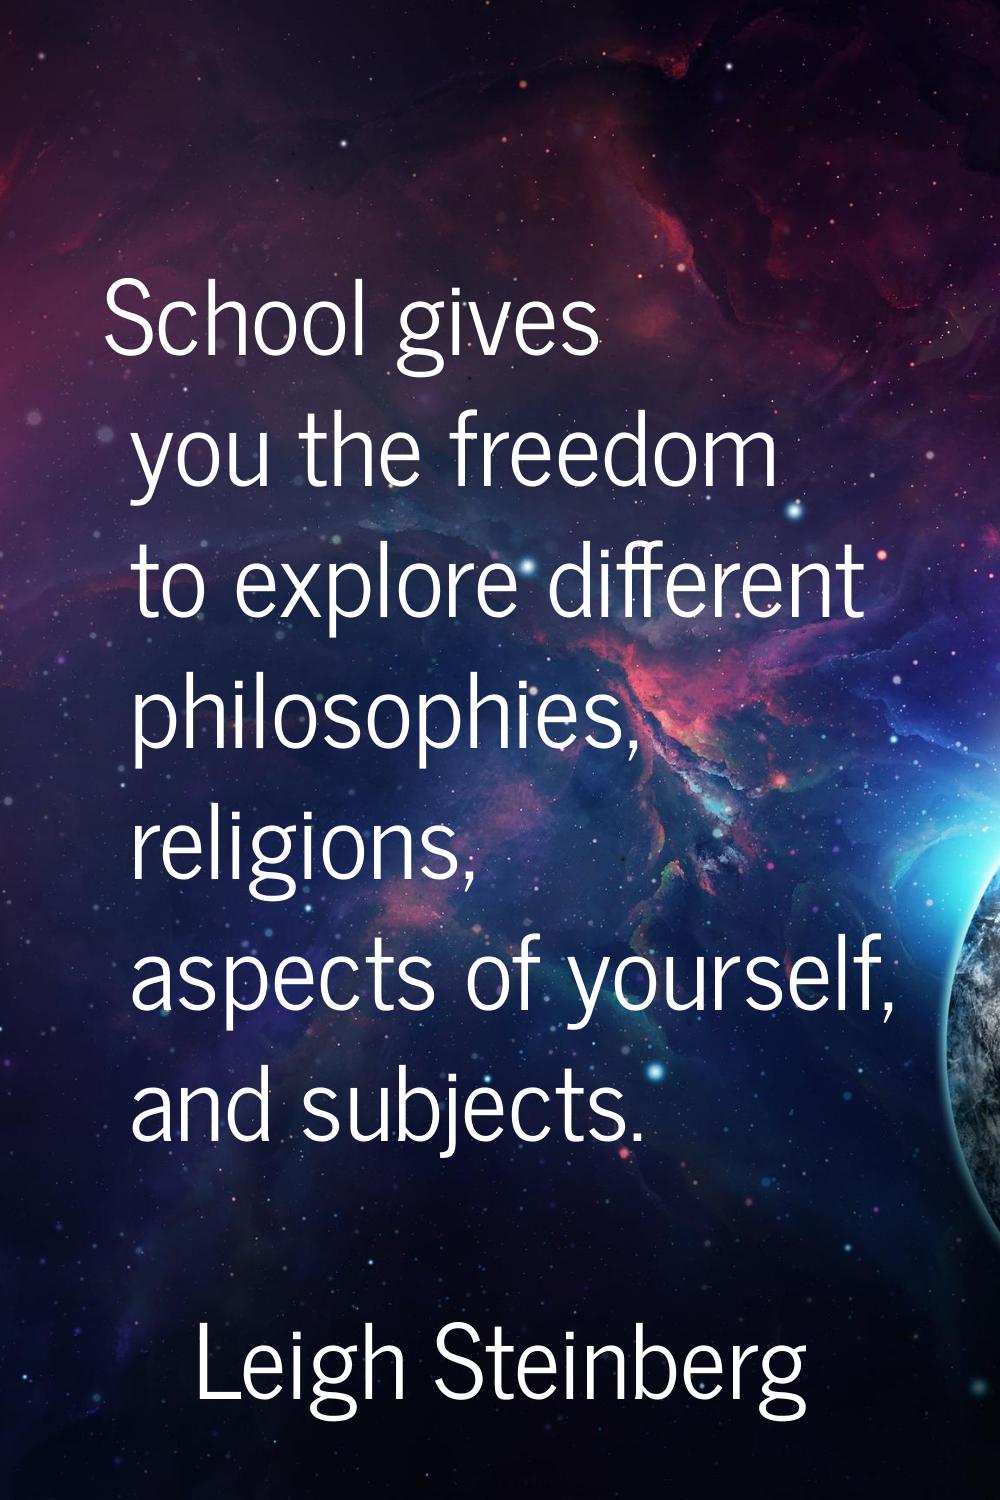 School gives you the freedom to explore different philosophies, religions, aspects of yourself, and